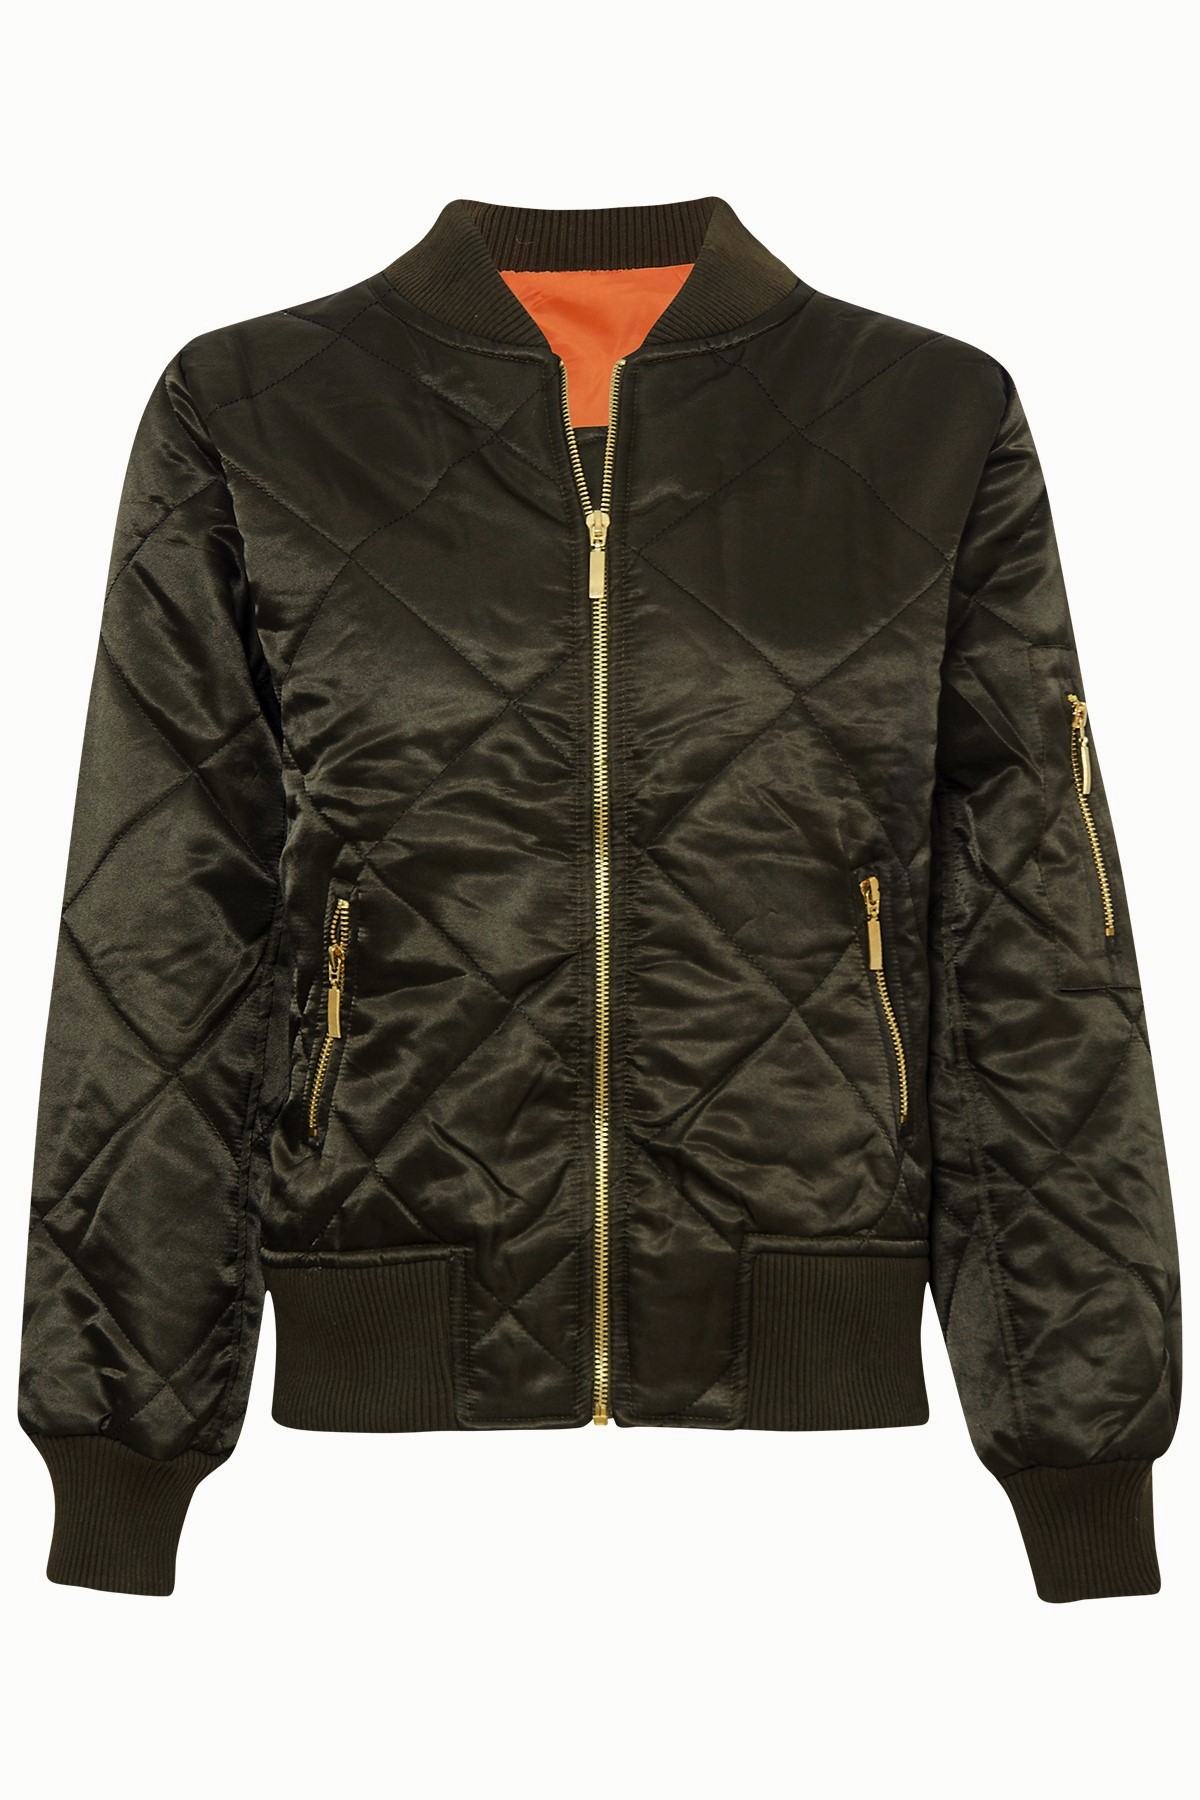 Diamond Quilted Classic Padded Bomber Jacket | Stylewise Direct